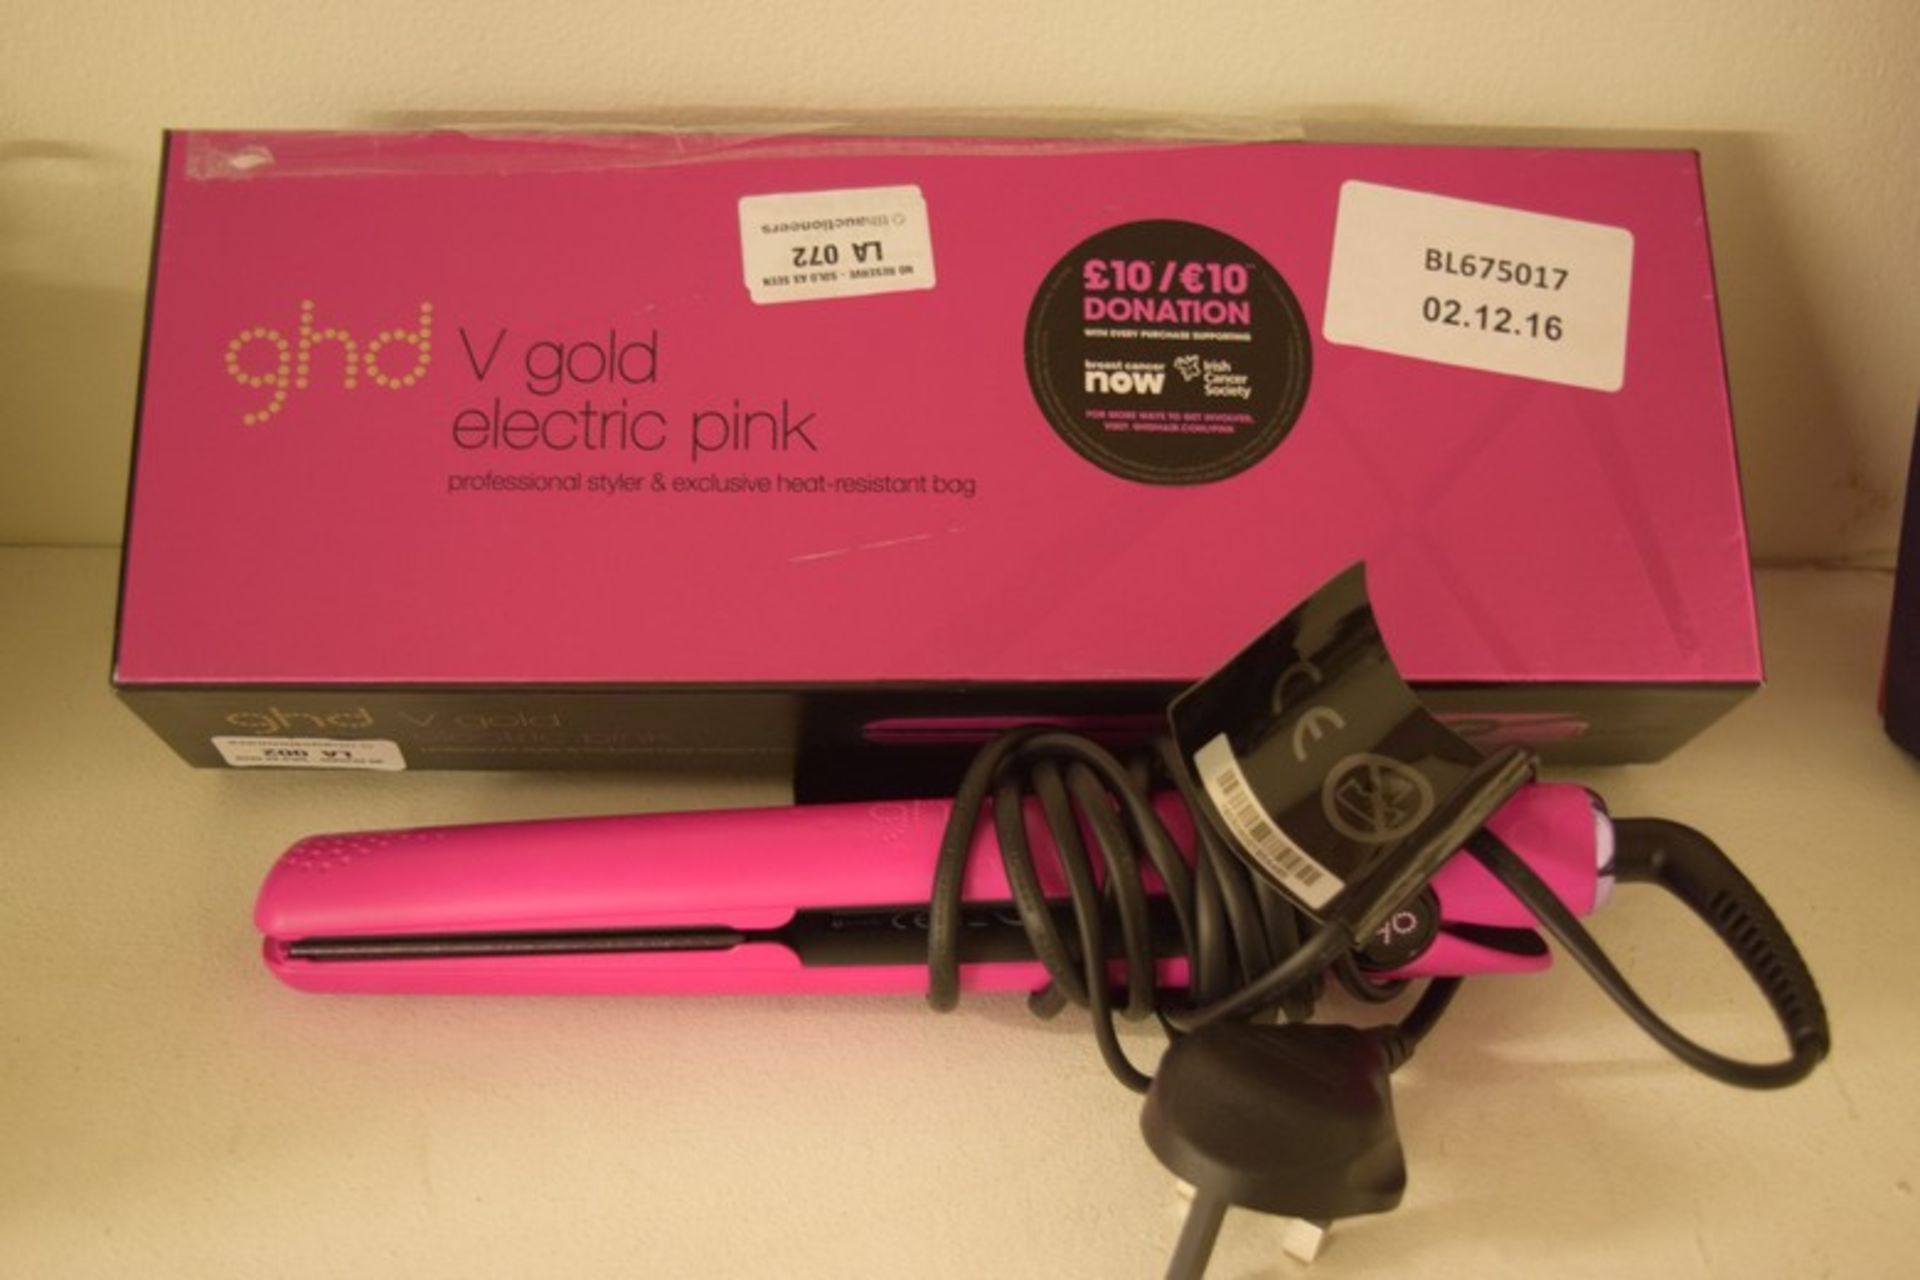 1 x BOXED GHD V-GOLD ELECTRIC PINK HAIR STRAIGHTENERS RRP £145 (02.12.2016) *PLEASE NOTE THAT THE